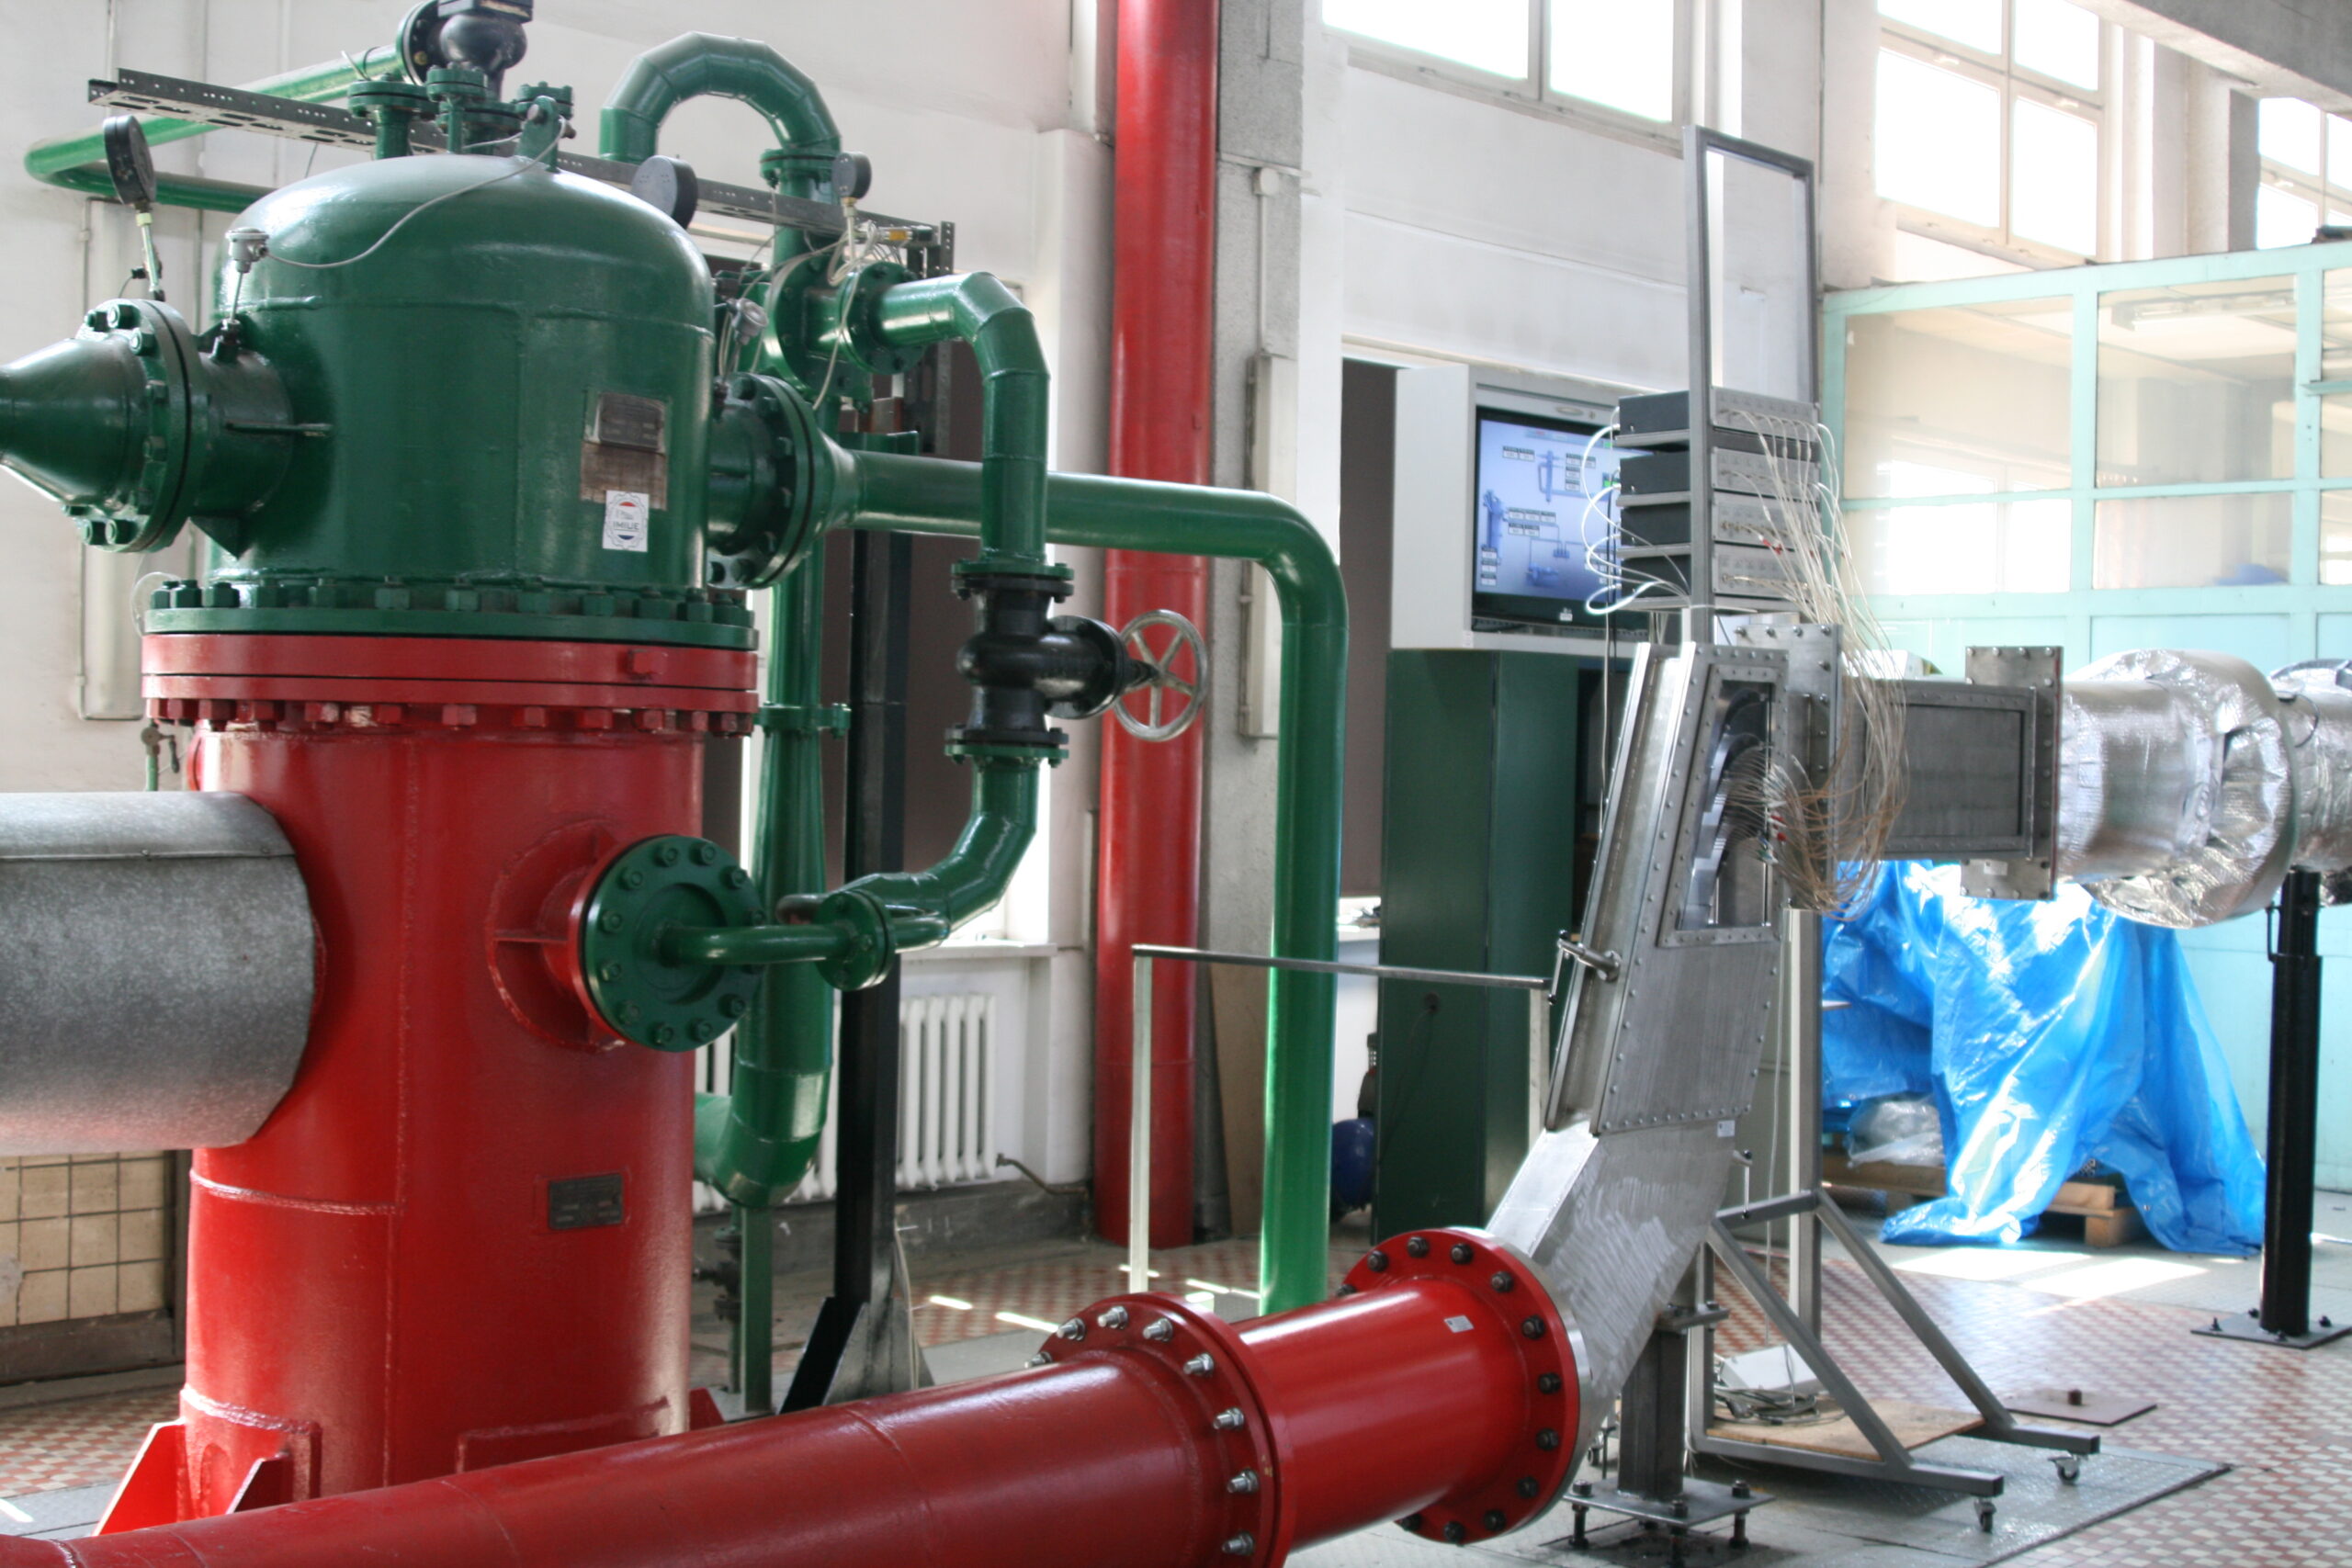 Velox Boiler and Steam Tests Lab